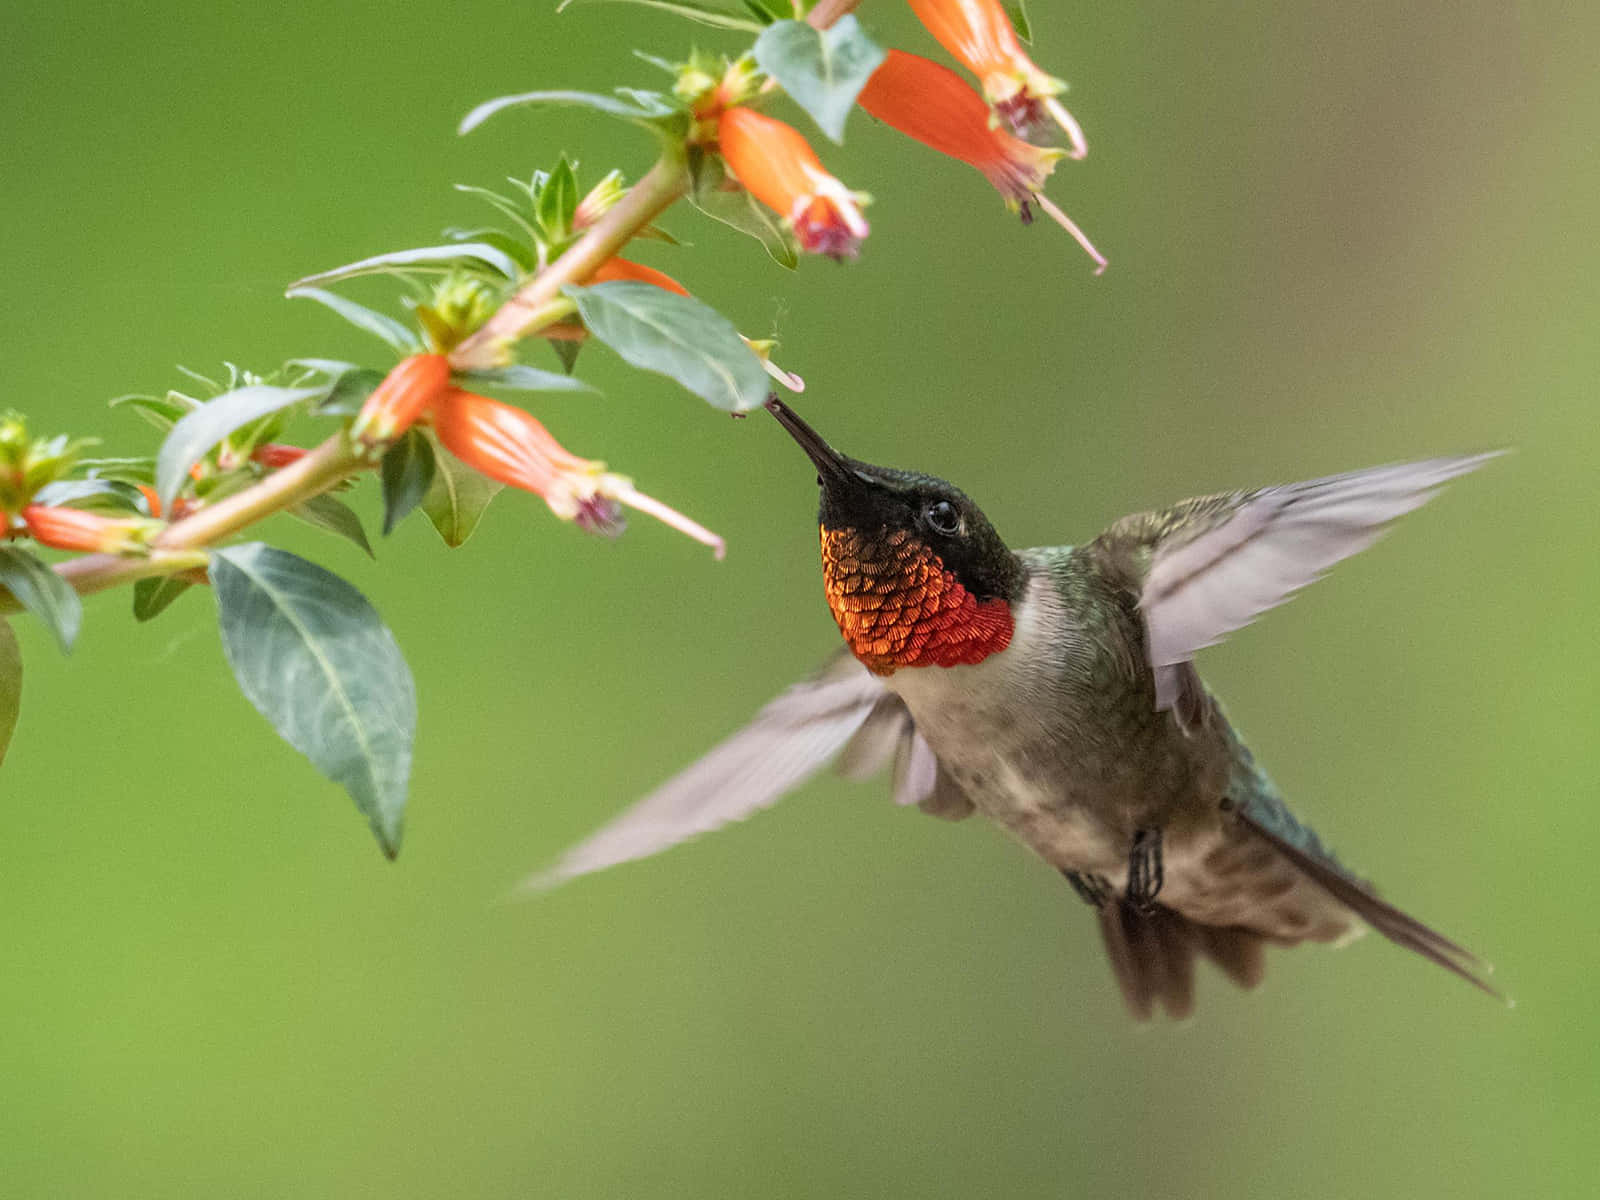 A beautiful hummingbird with colorful wings pauses in mid-air